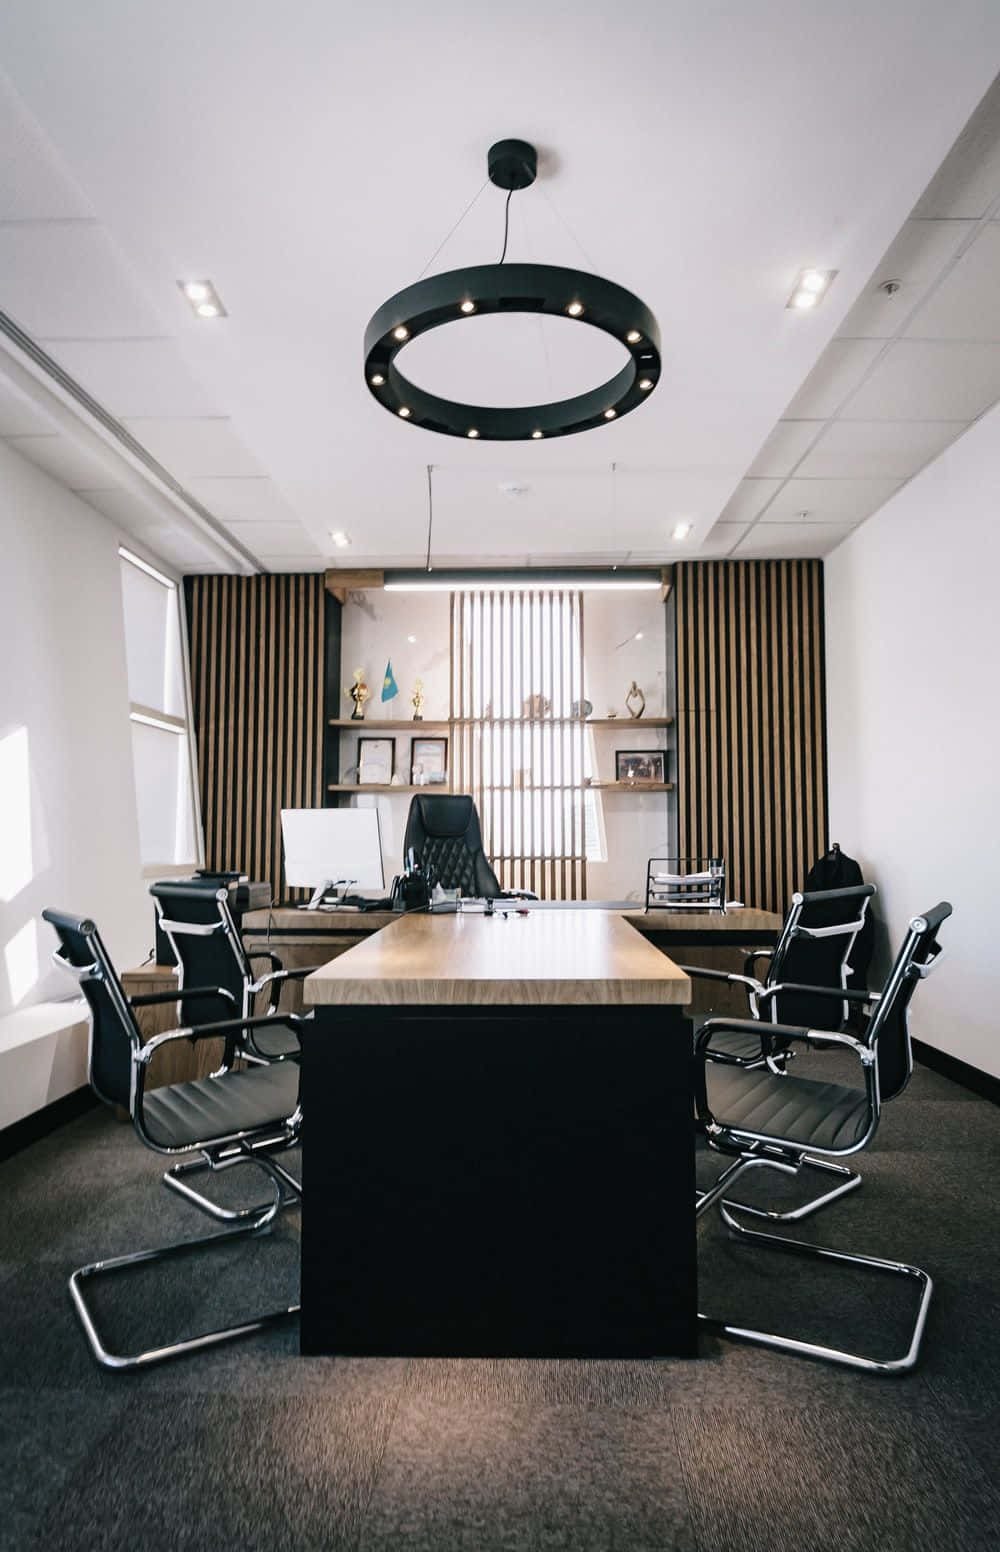 A Modern Office With A Black Table And Chairs